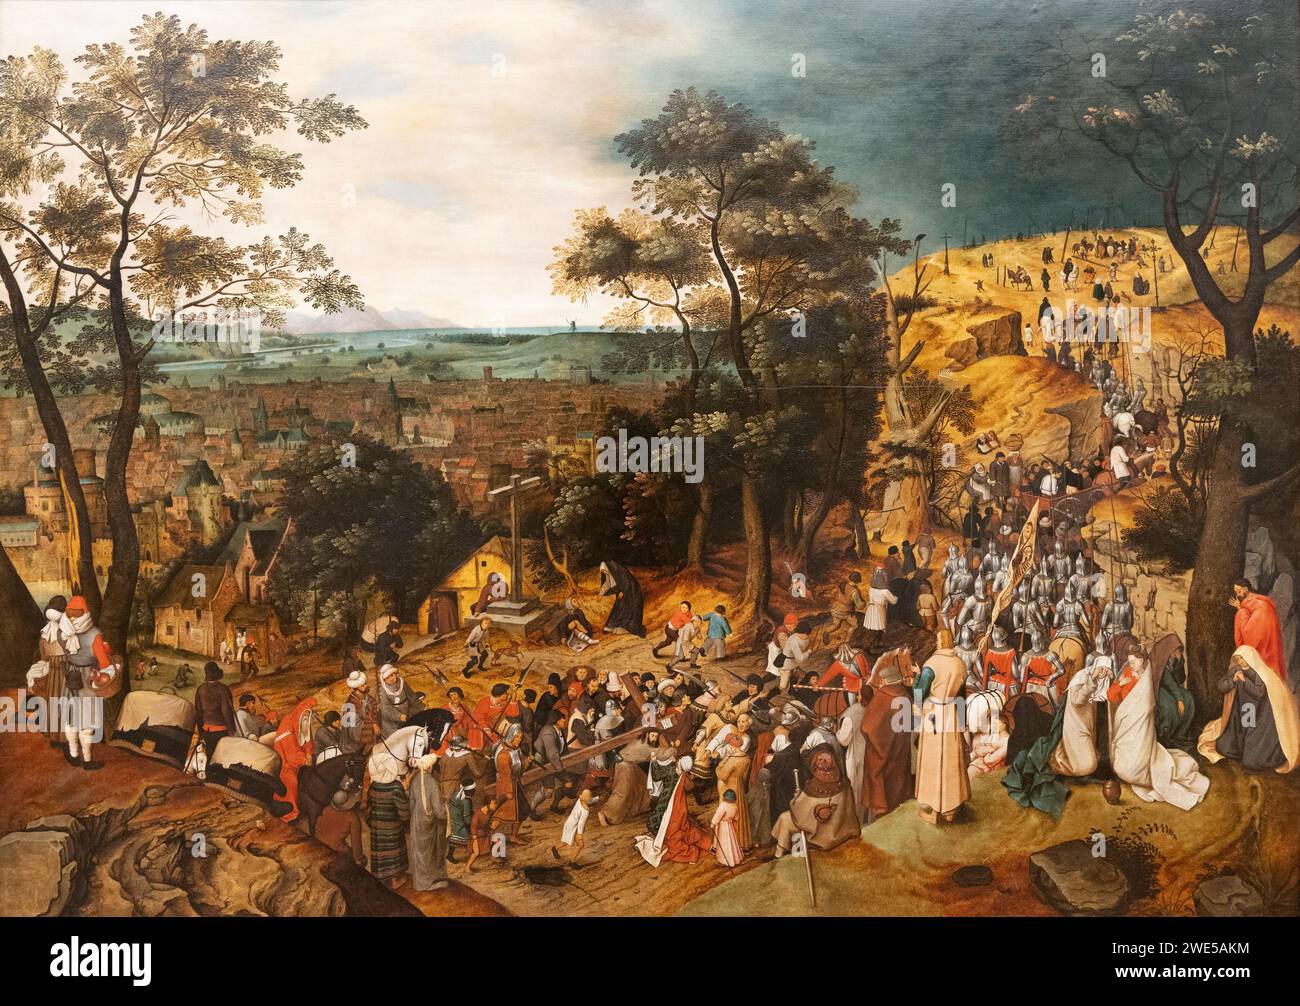 Pieter Brueghel the Younger painting, 'The Carrying of the Cross'; or 'Christ carrying the Cross'; 1606. Flemish painter, 1564-1637; 1600s paintings. Stock Photo